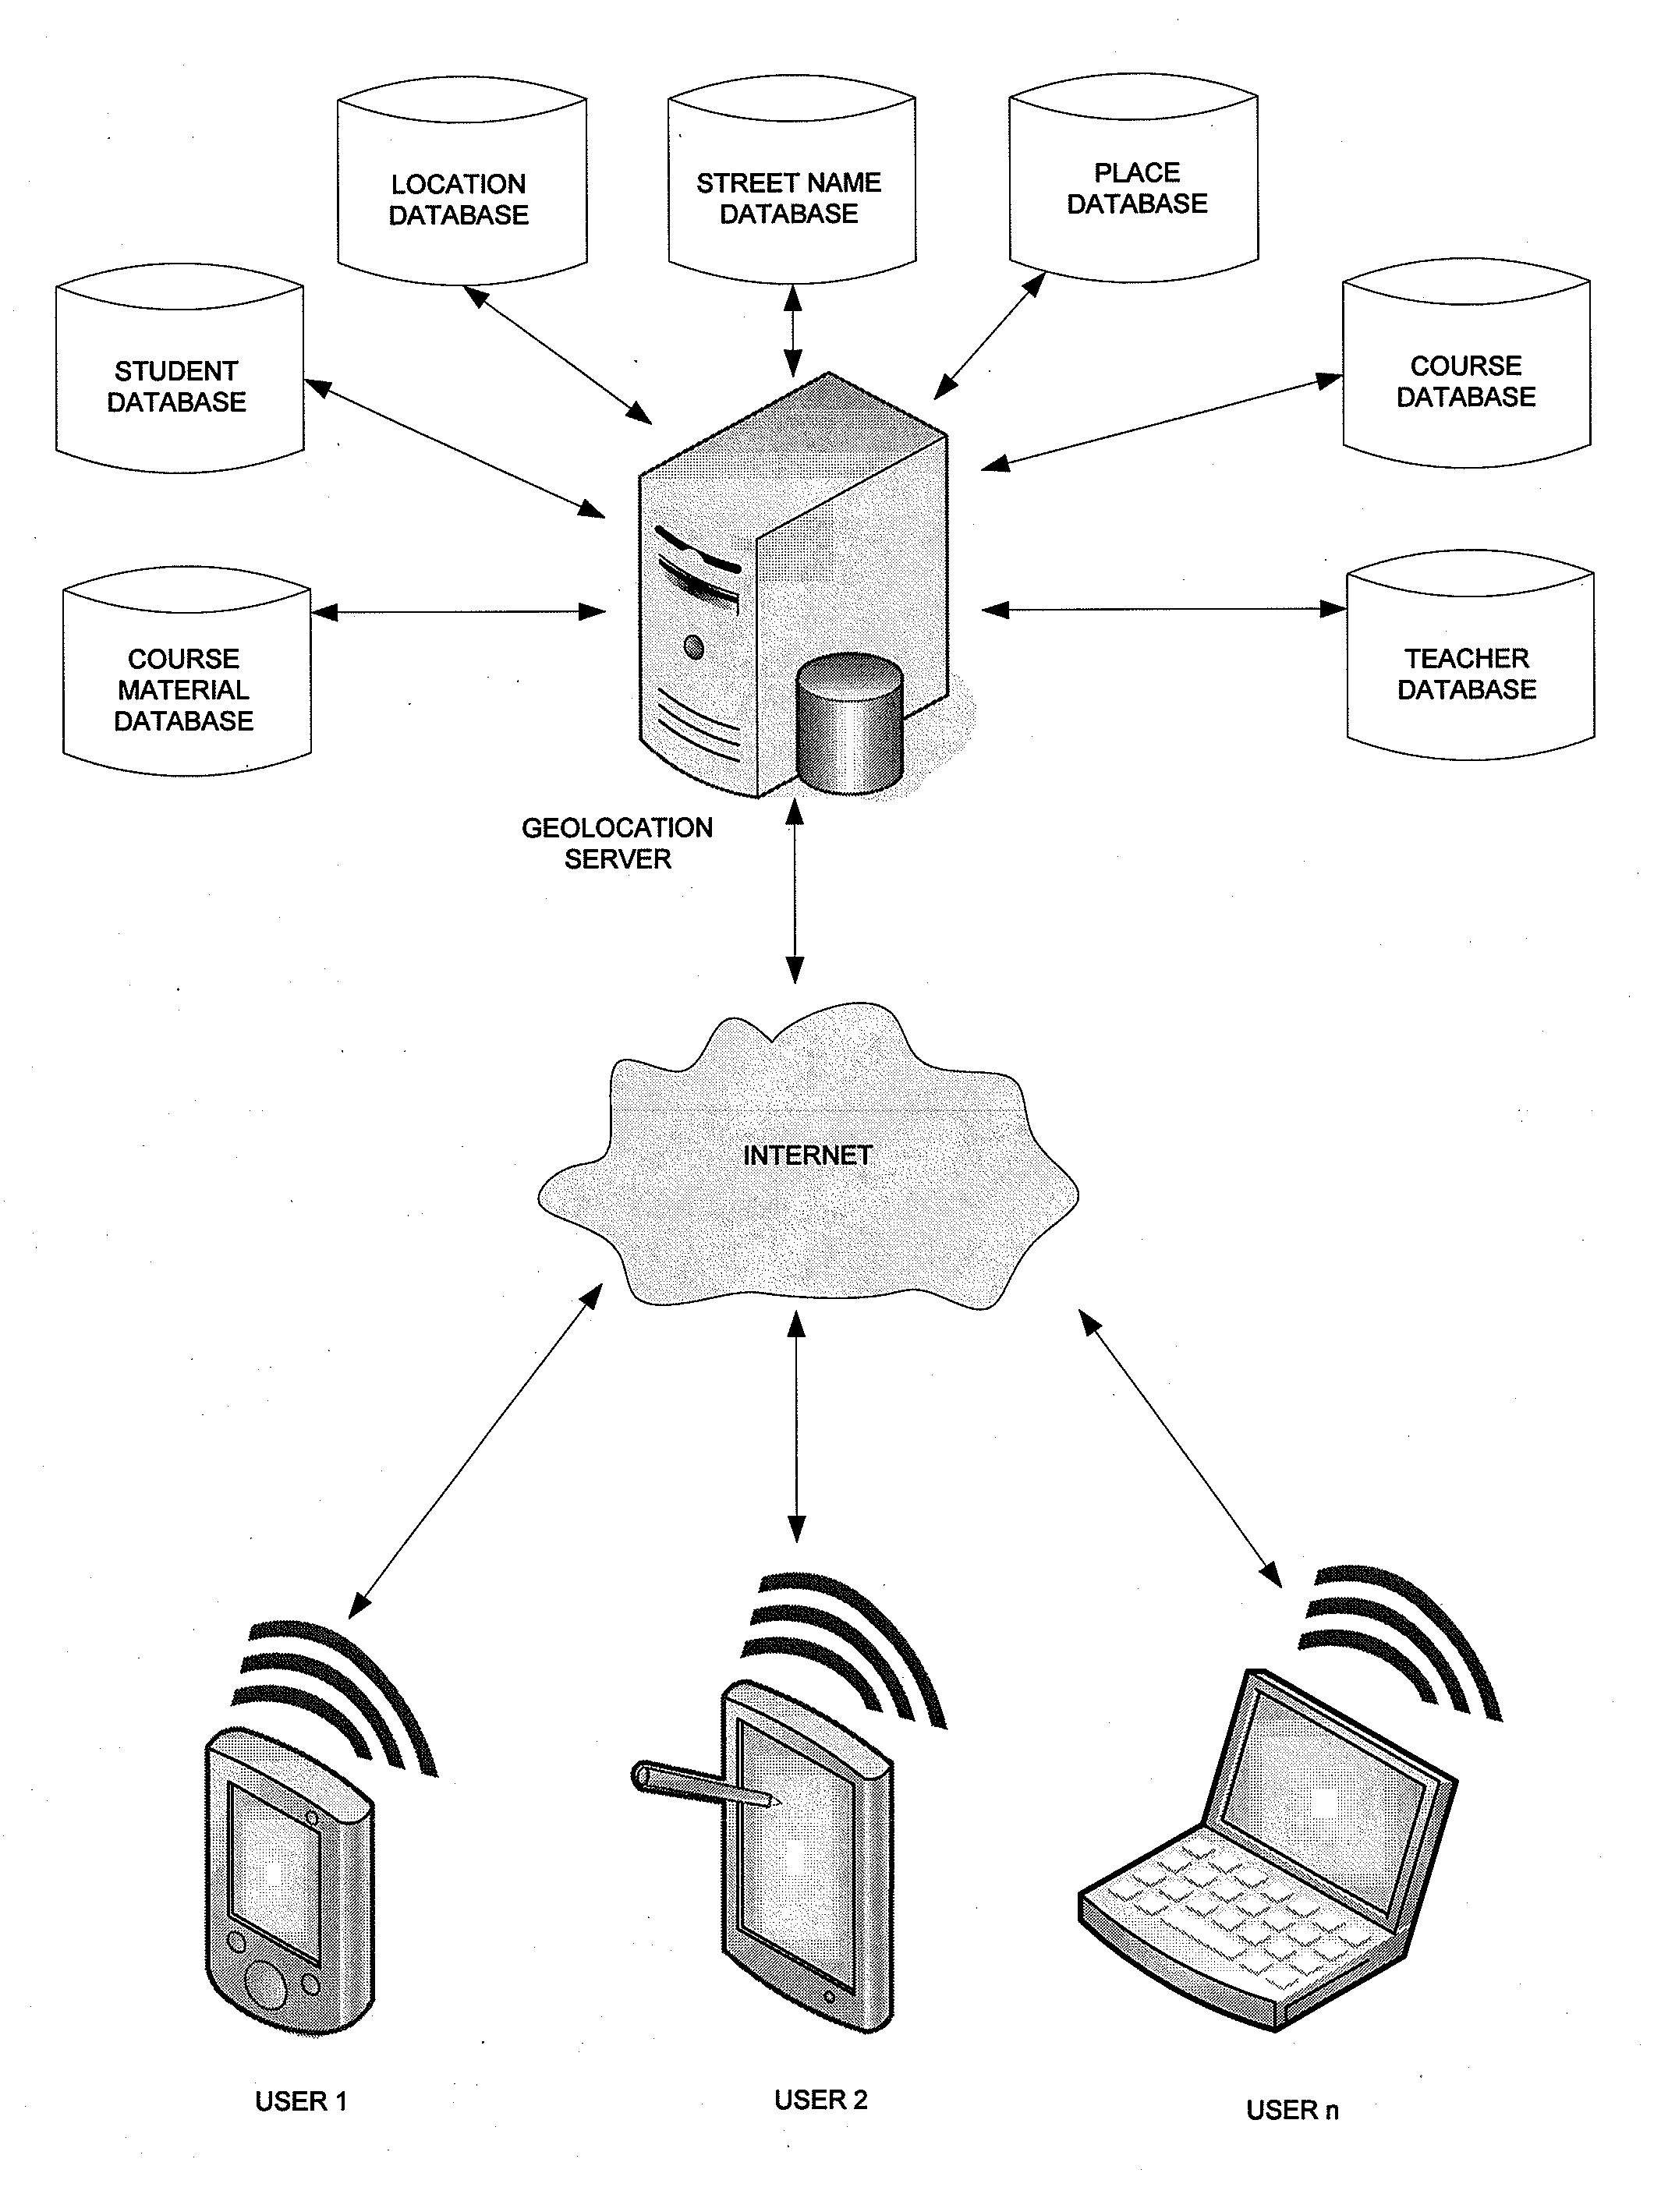 Educational system and method for creating learning sessions based on geo-location information